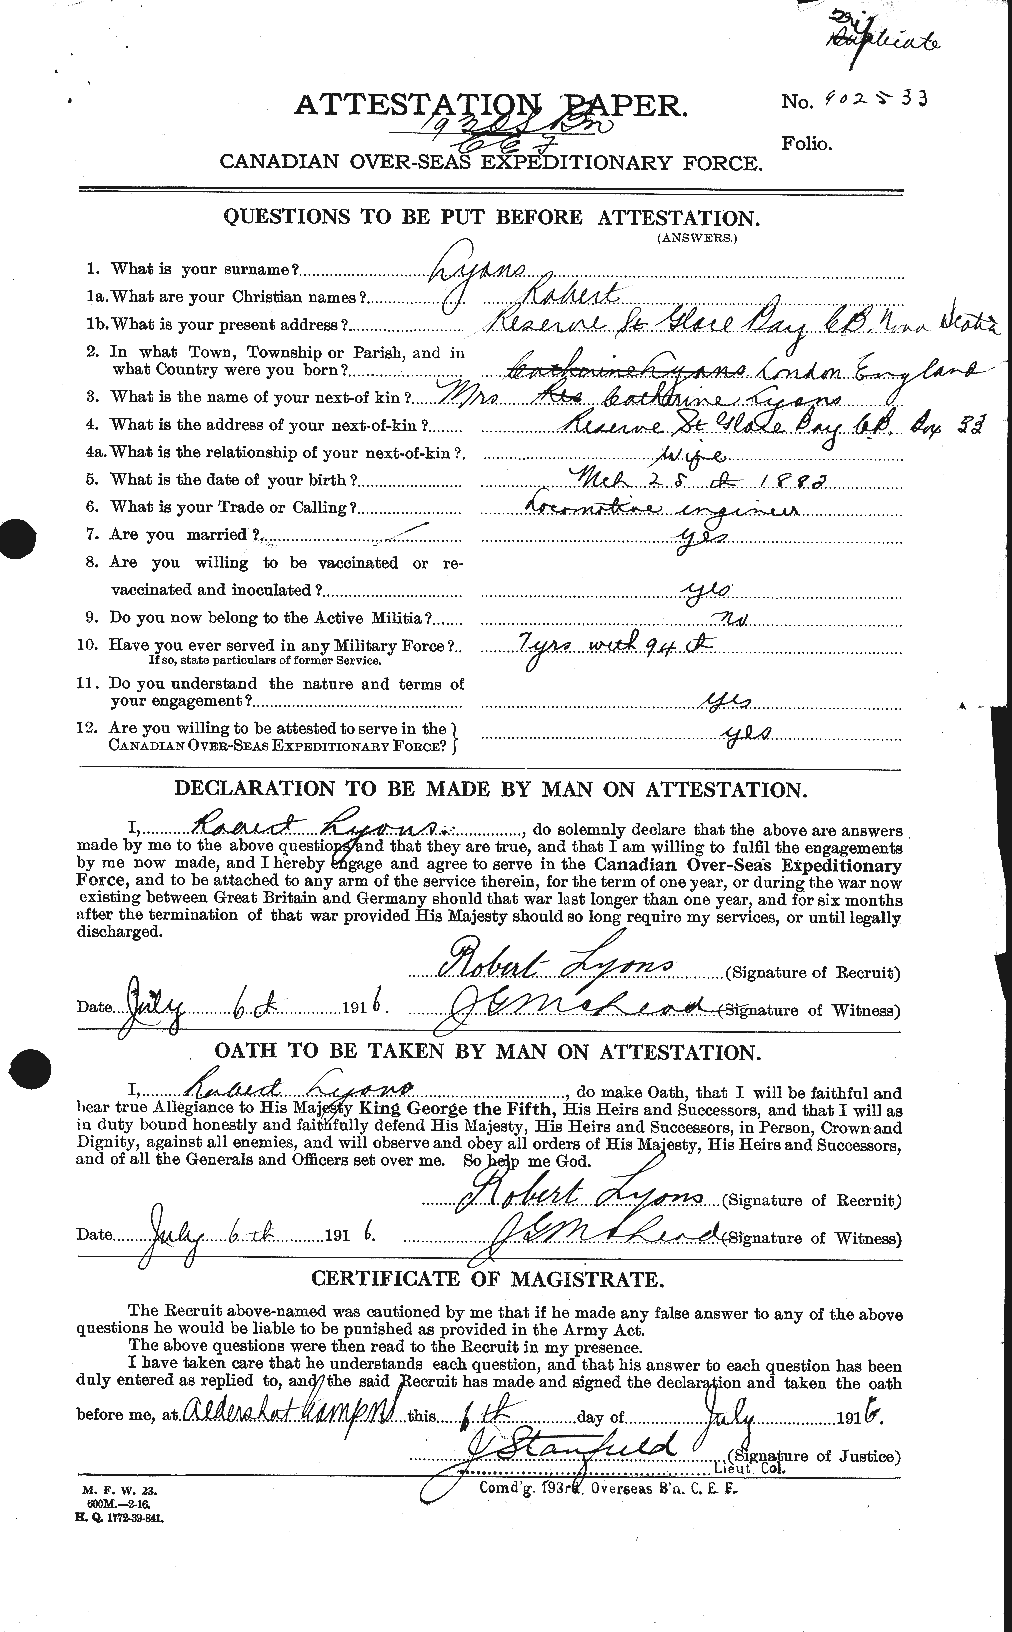 Personnel Records of the First World War - CEF 474846a